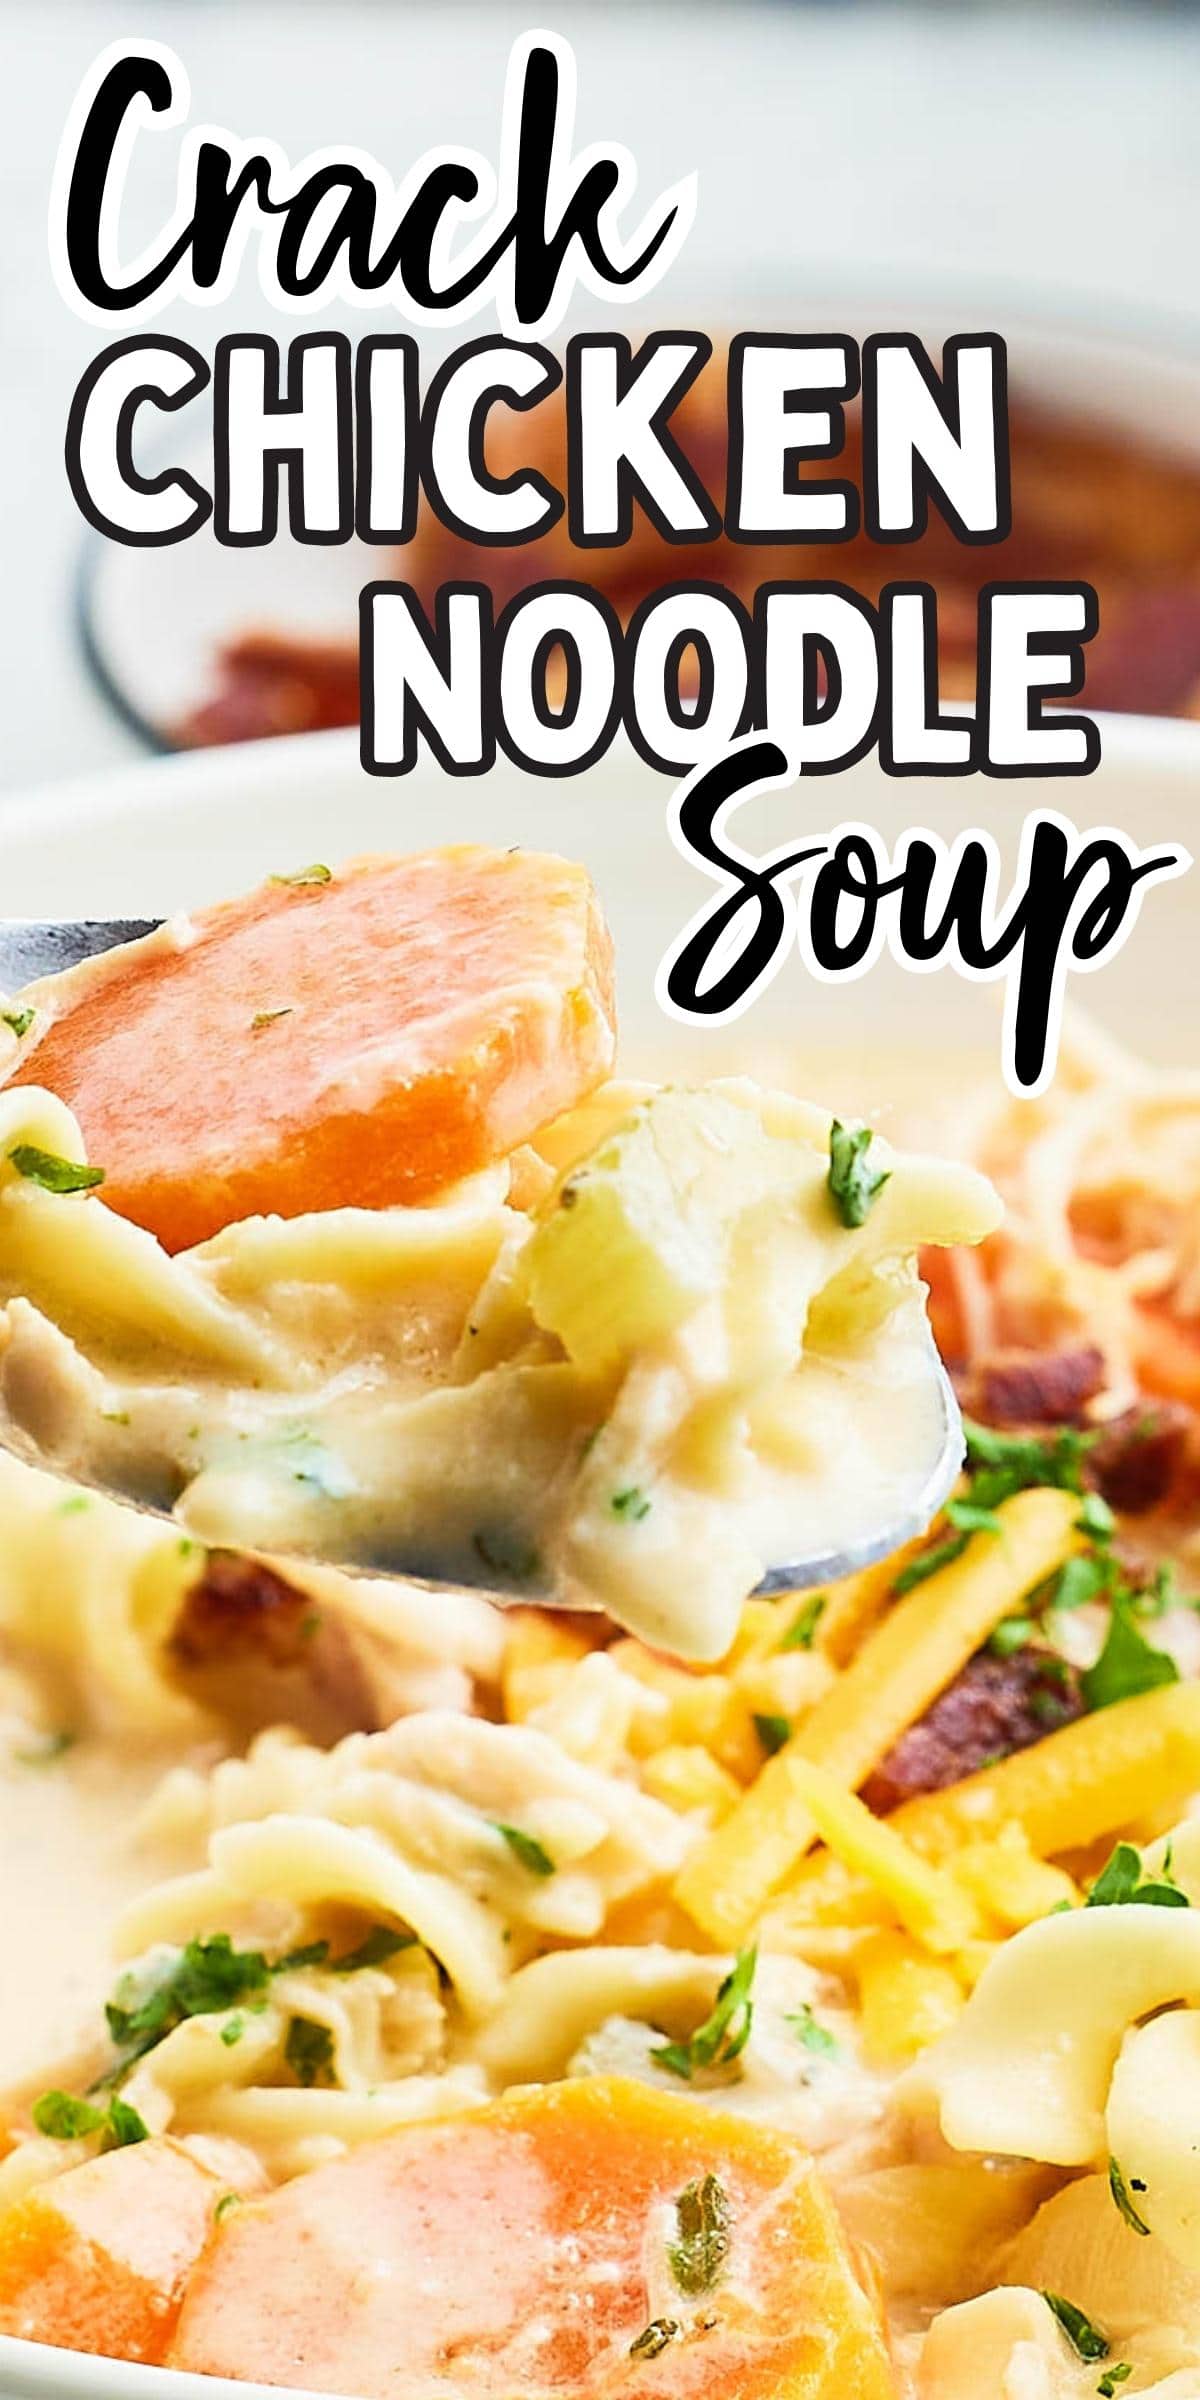 Try our incredibly delicious creamy Crack Chicken Noodle Soup! It's got all your favorites - chicken, cheese, bacon, and ranch. It's easy to make and your family will love it. #cheerfulcook #CrackChickenSoup #ChickenSoup #DinnerIdeas #creamychickensoup #chickensoup #baconranch #easyrecipe via @cheerfulcook